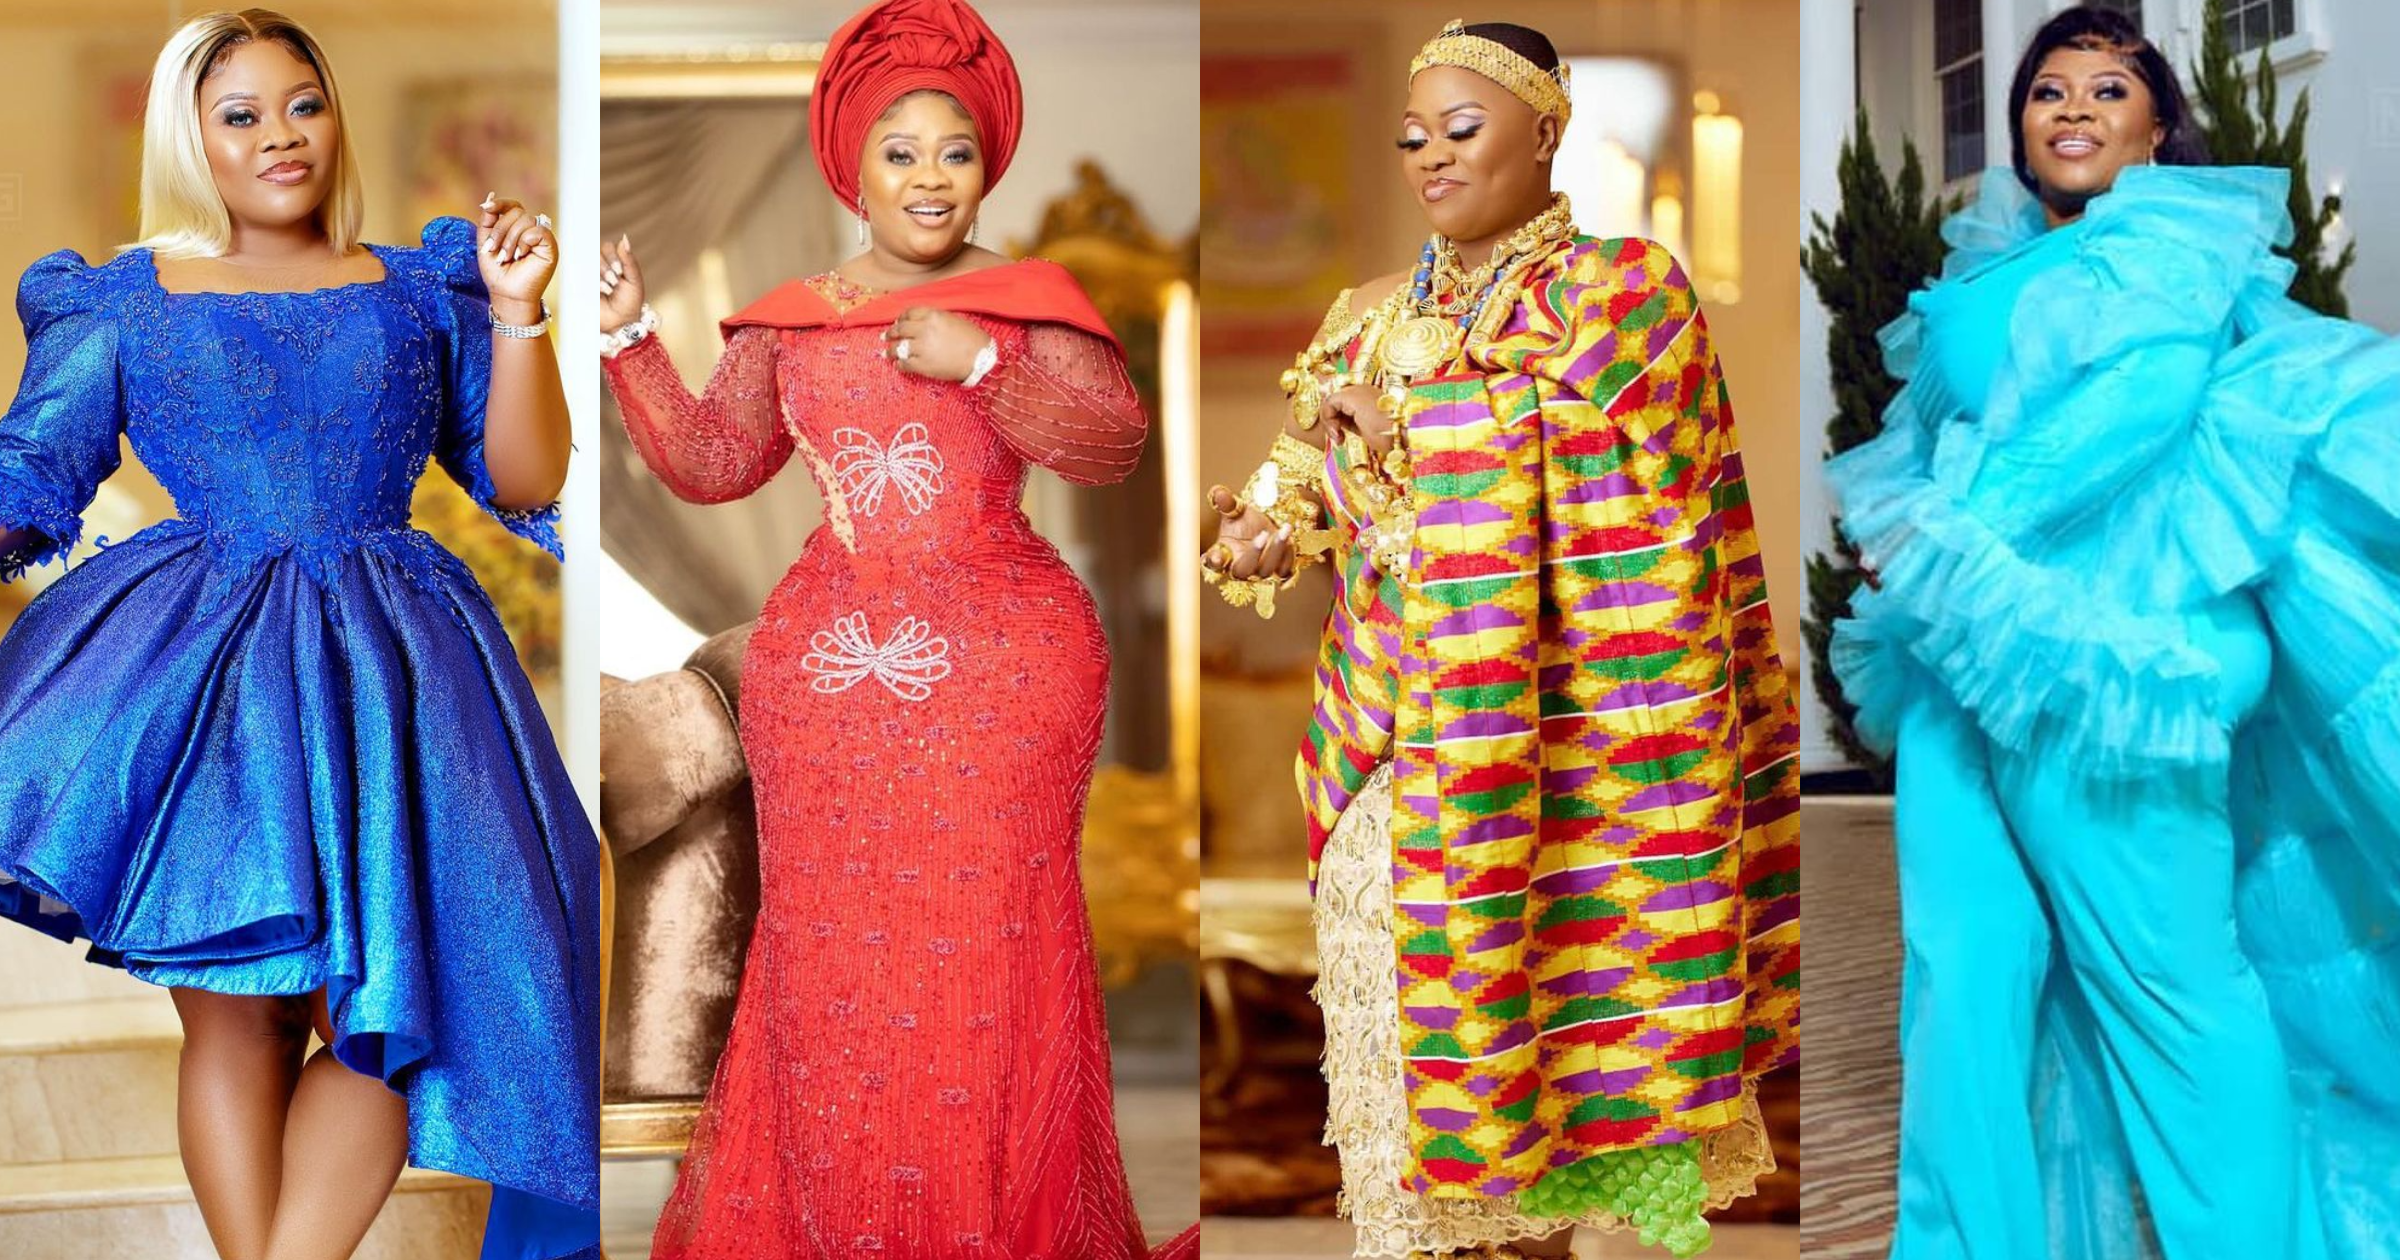 Obofour's wife celebrates birthday like a queen; drops beautiful fashionista photos